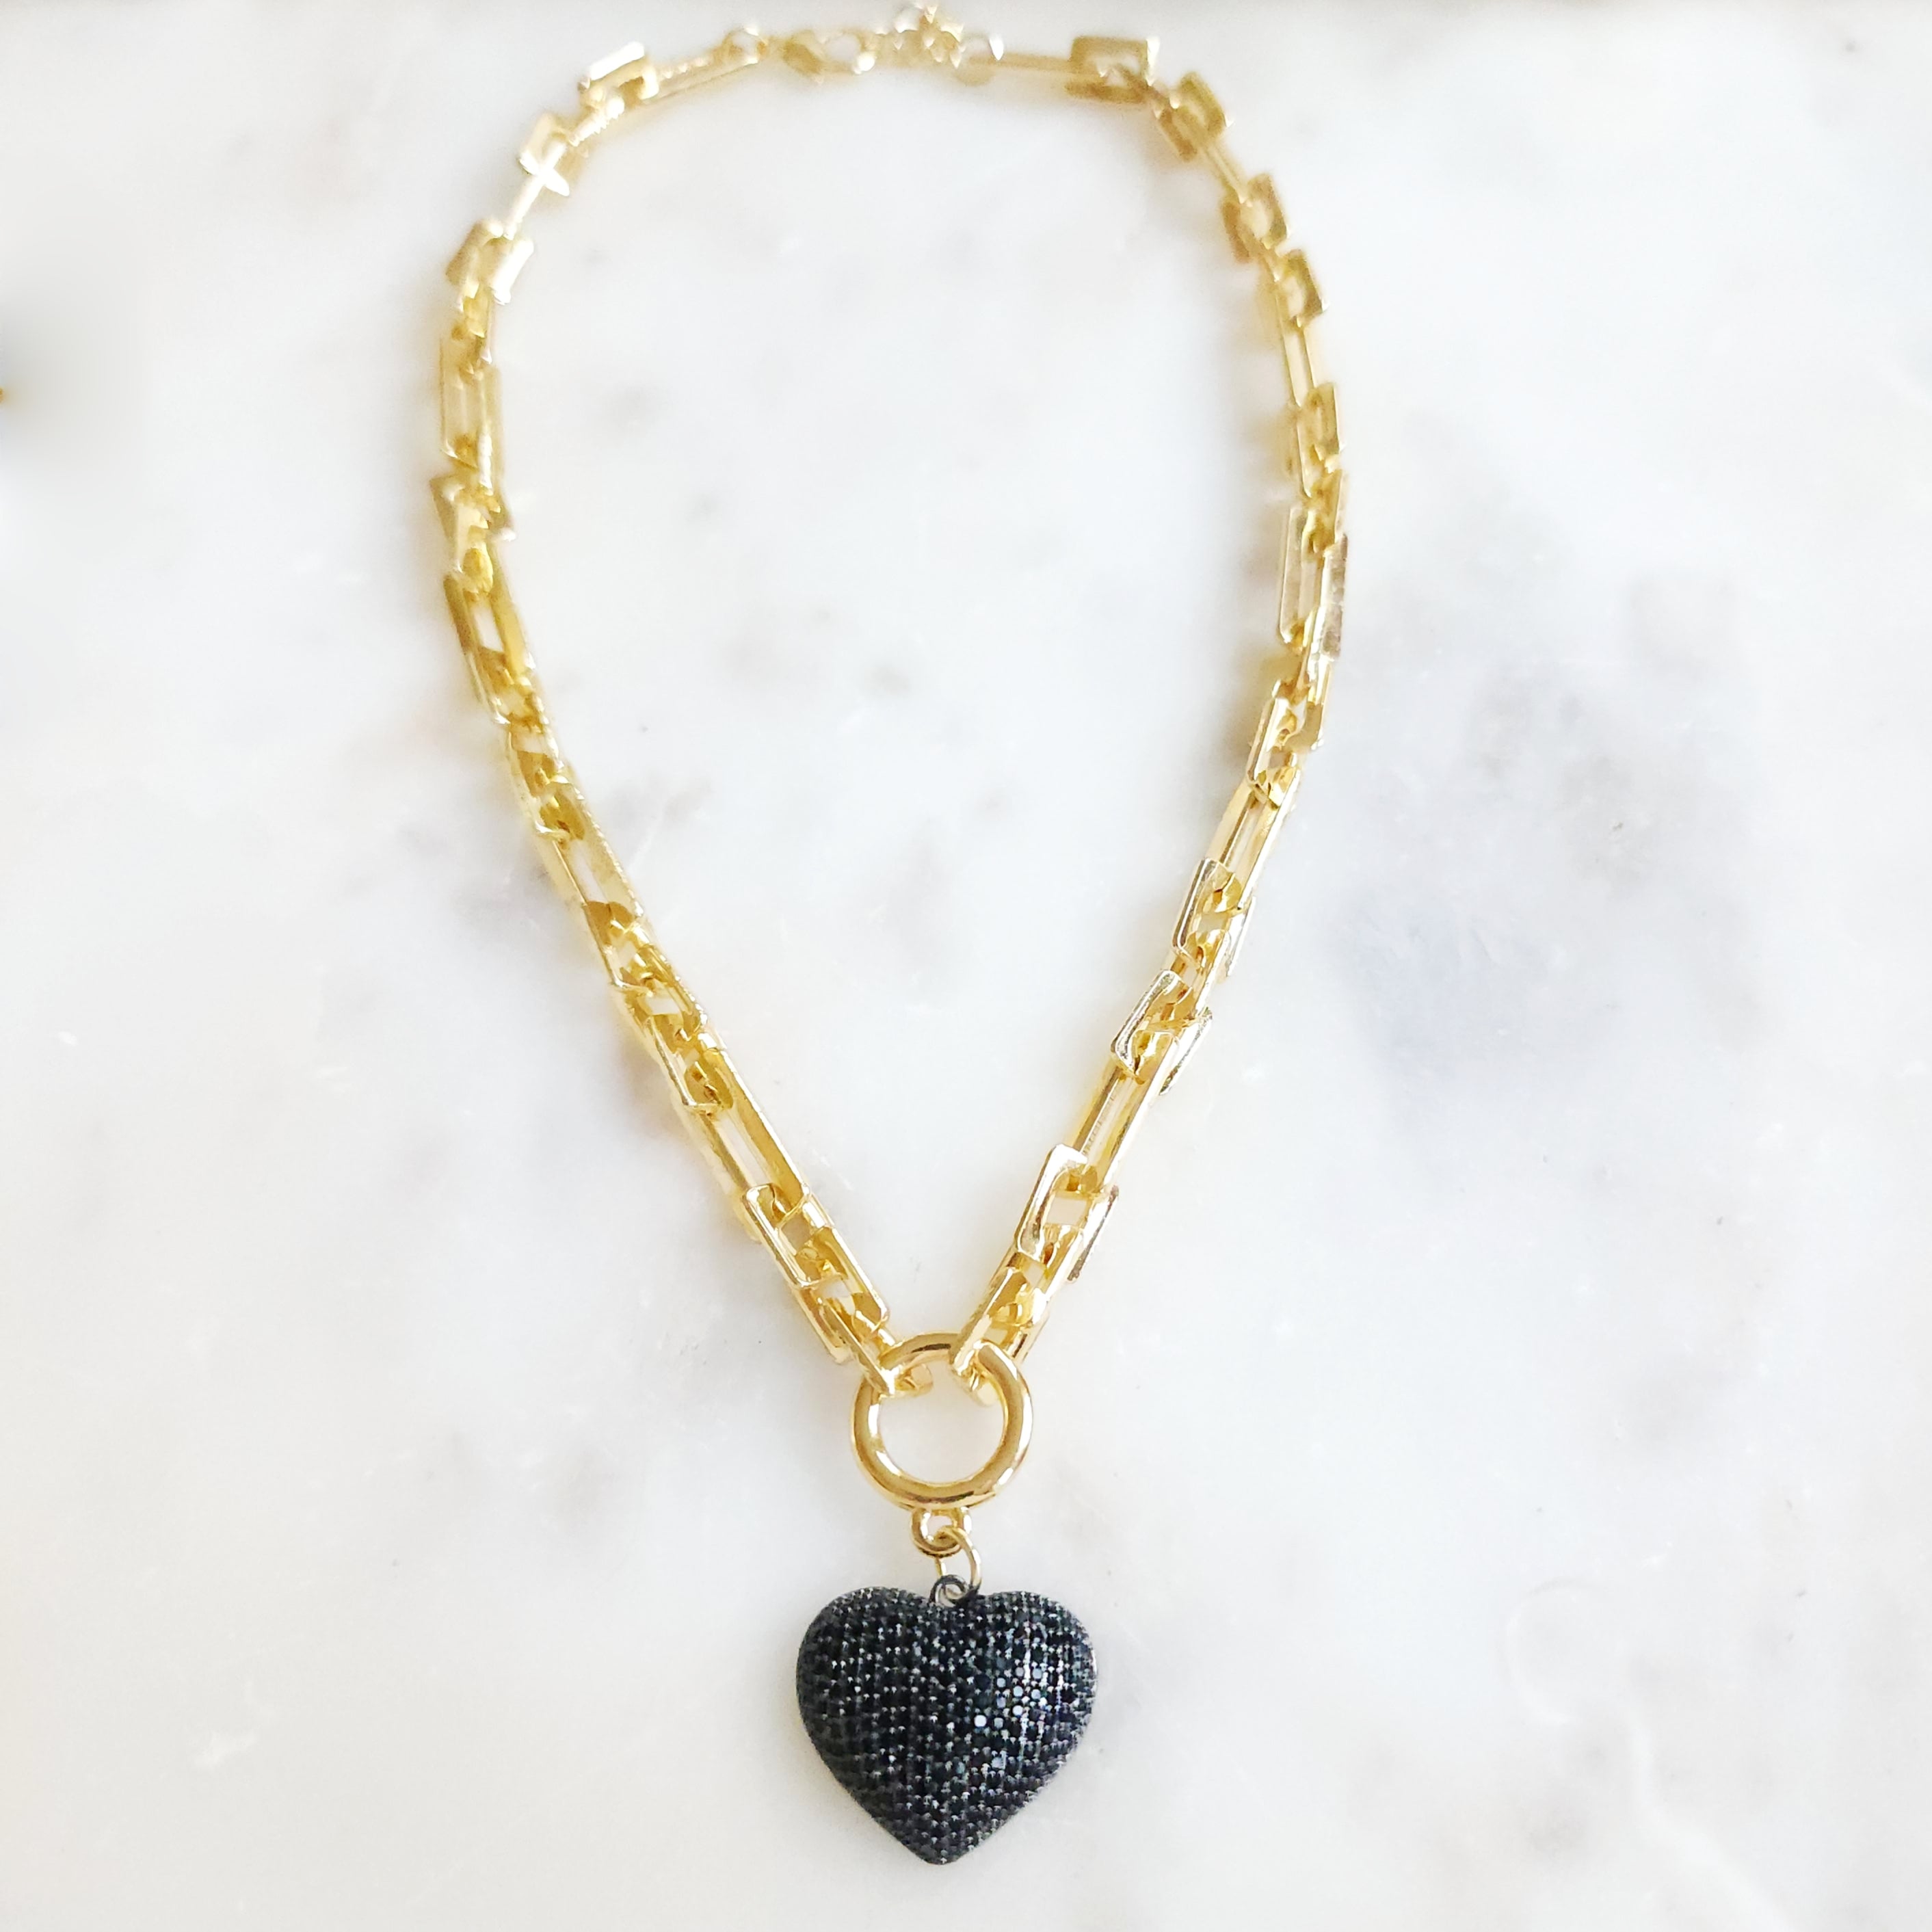 Shine Upon Heart Necklace